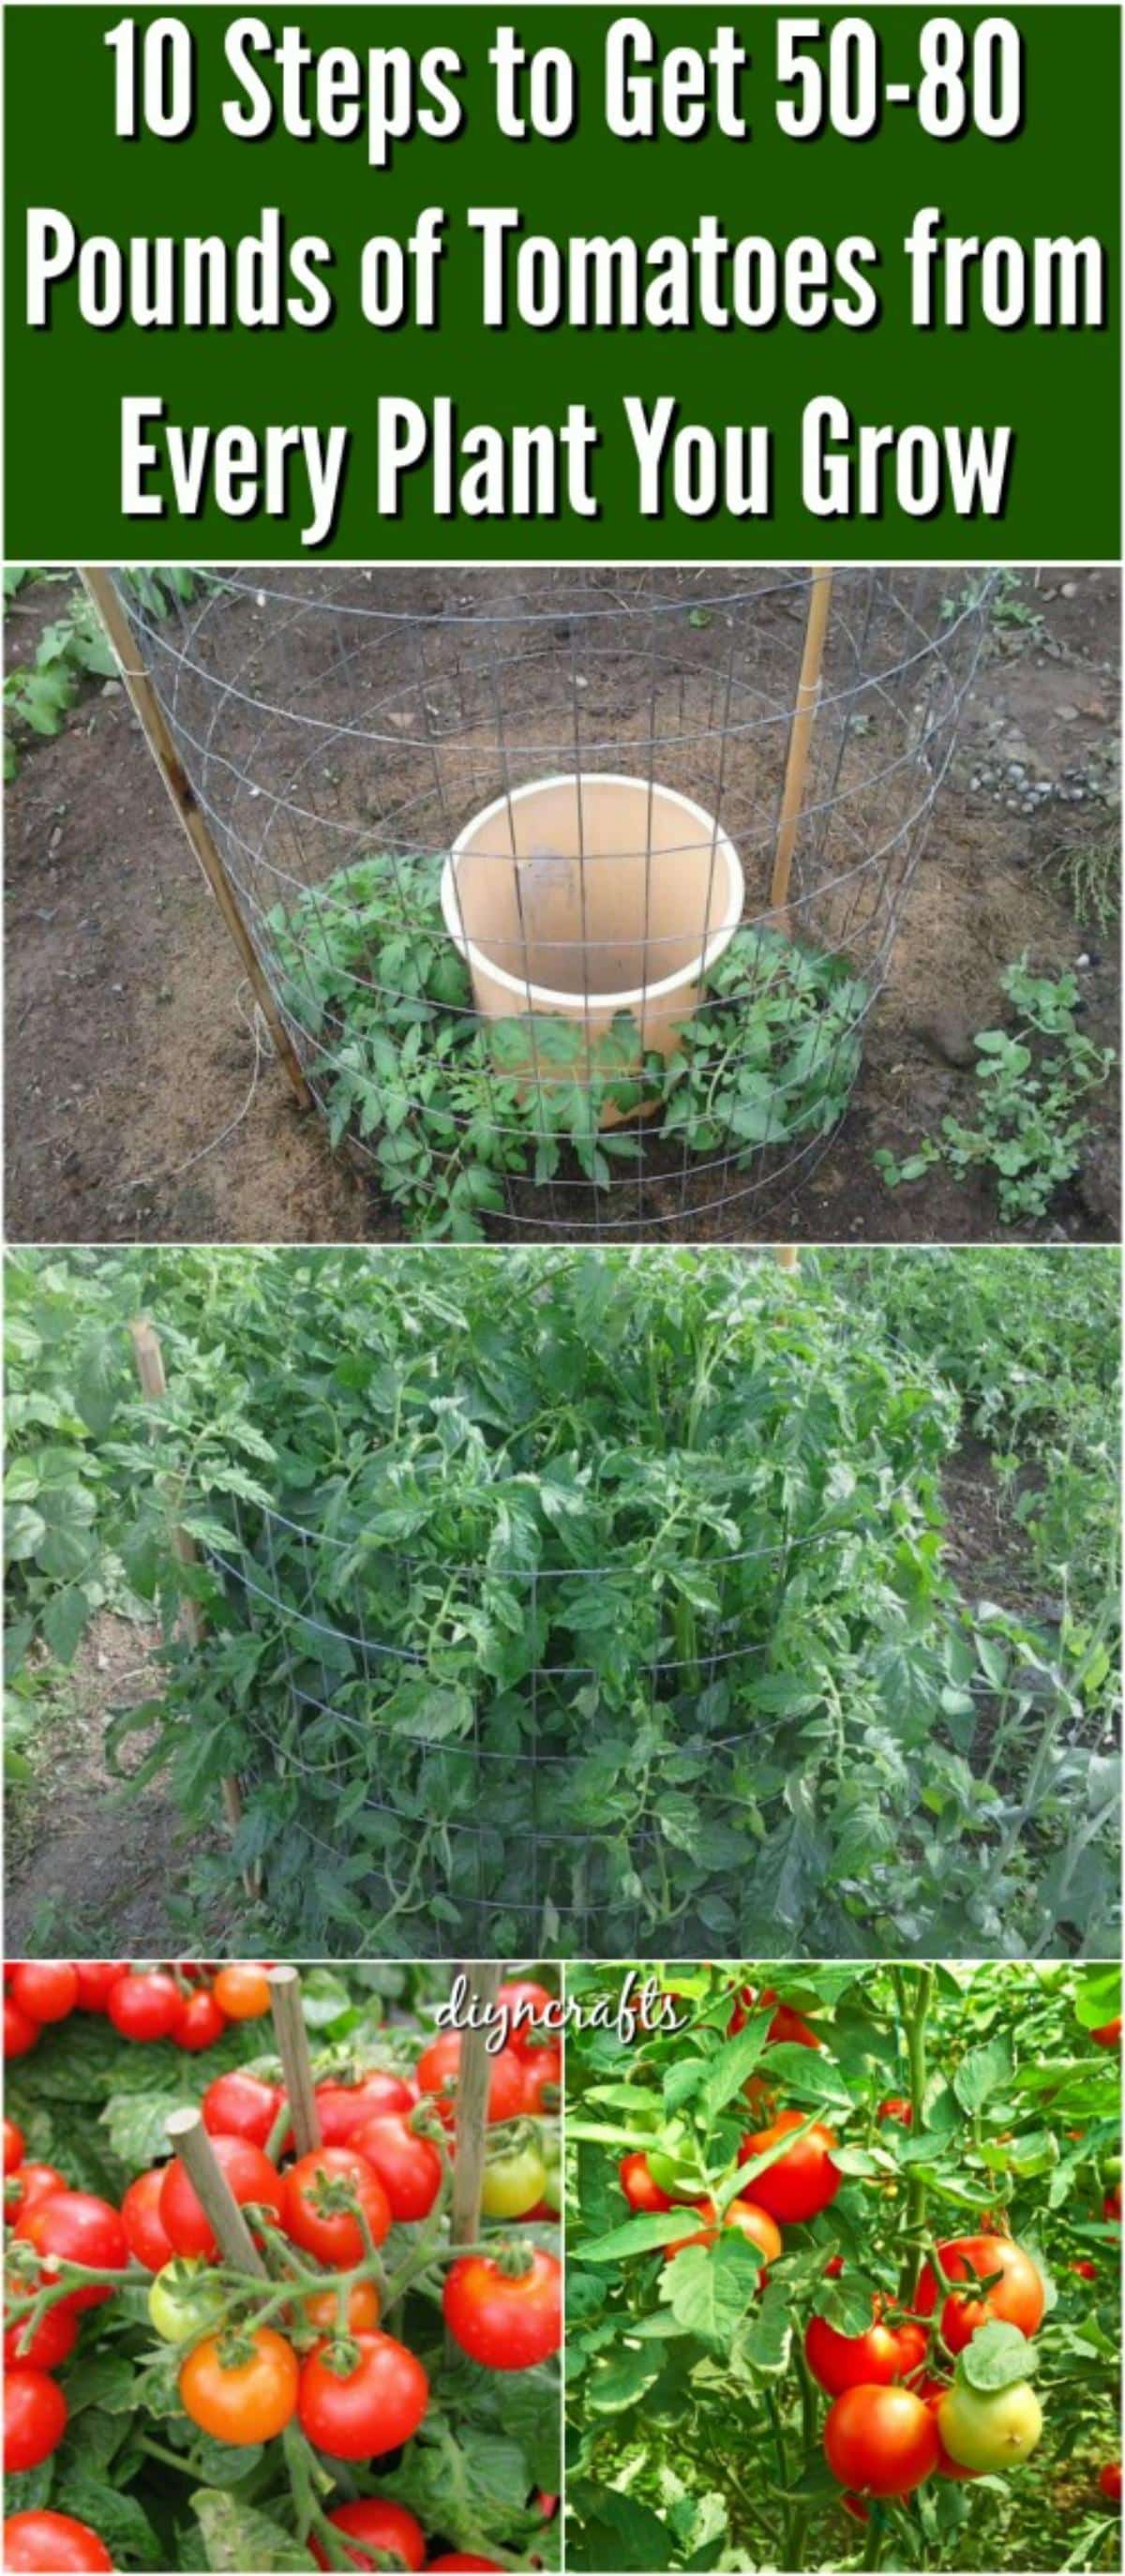 10 Steps to Get 50-80 Pounds of Tomatoes from Every Plant You Grow. Revealed: The Secret to Growing Juicy, Tasty, High-Yield Tomatoes